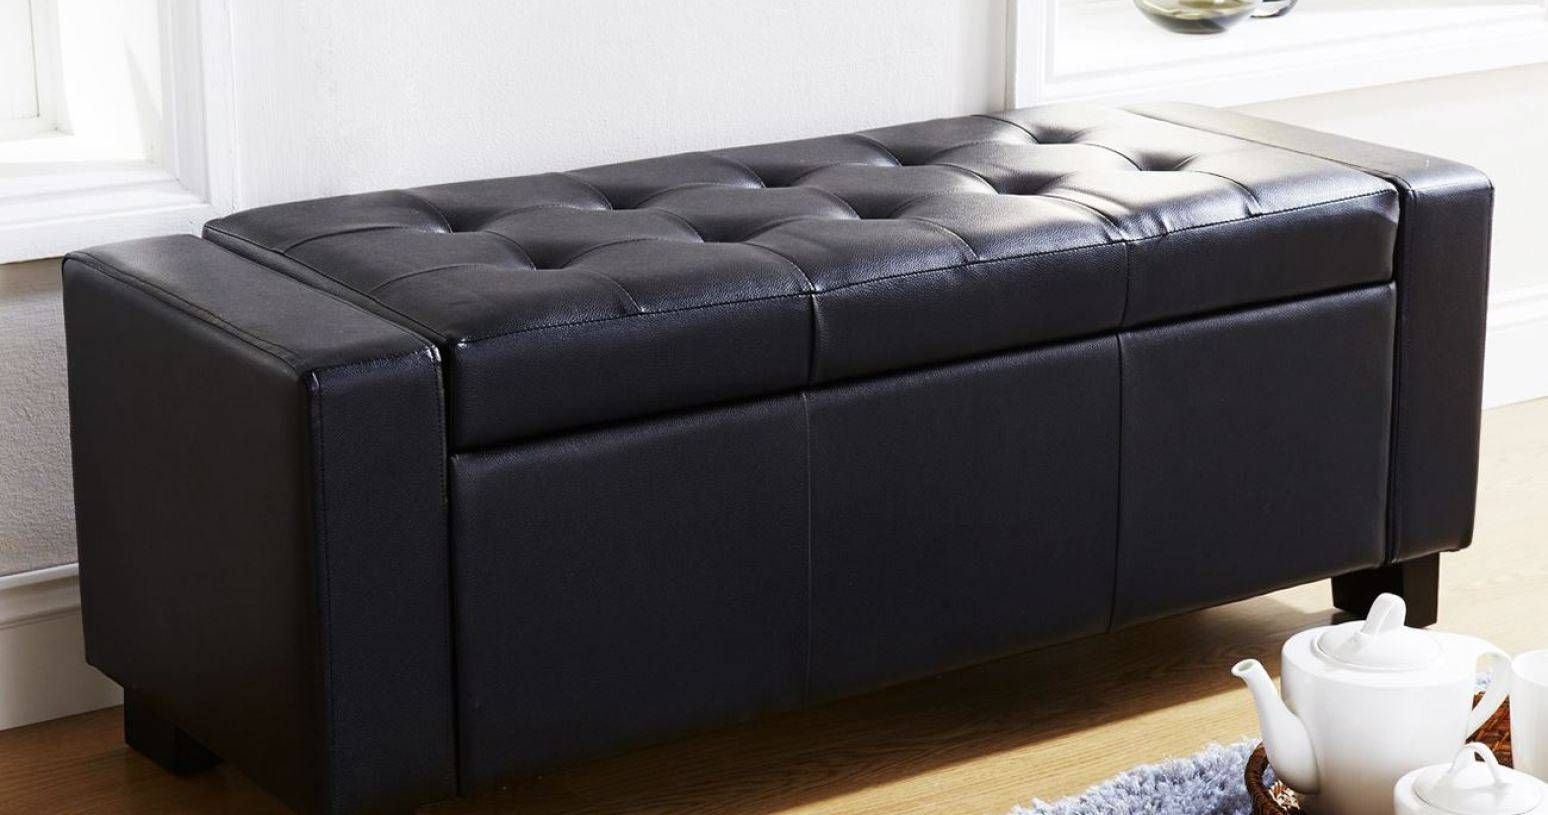 Uncategorized : Remarkable Purple Ottoman Storage Bench Imposing Intended For Purple Ottoman Coffee Tables (View 25 of 30)